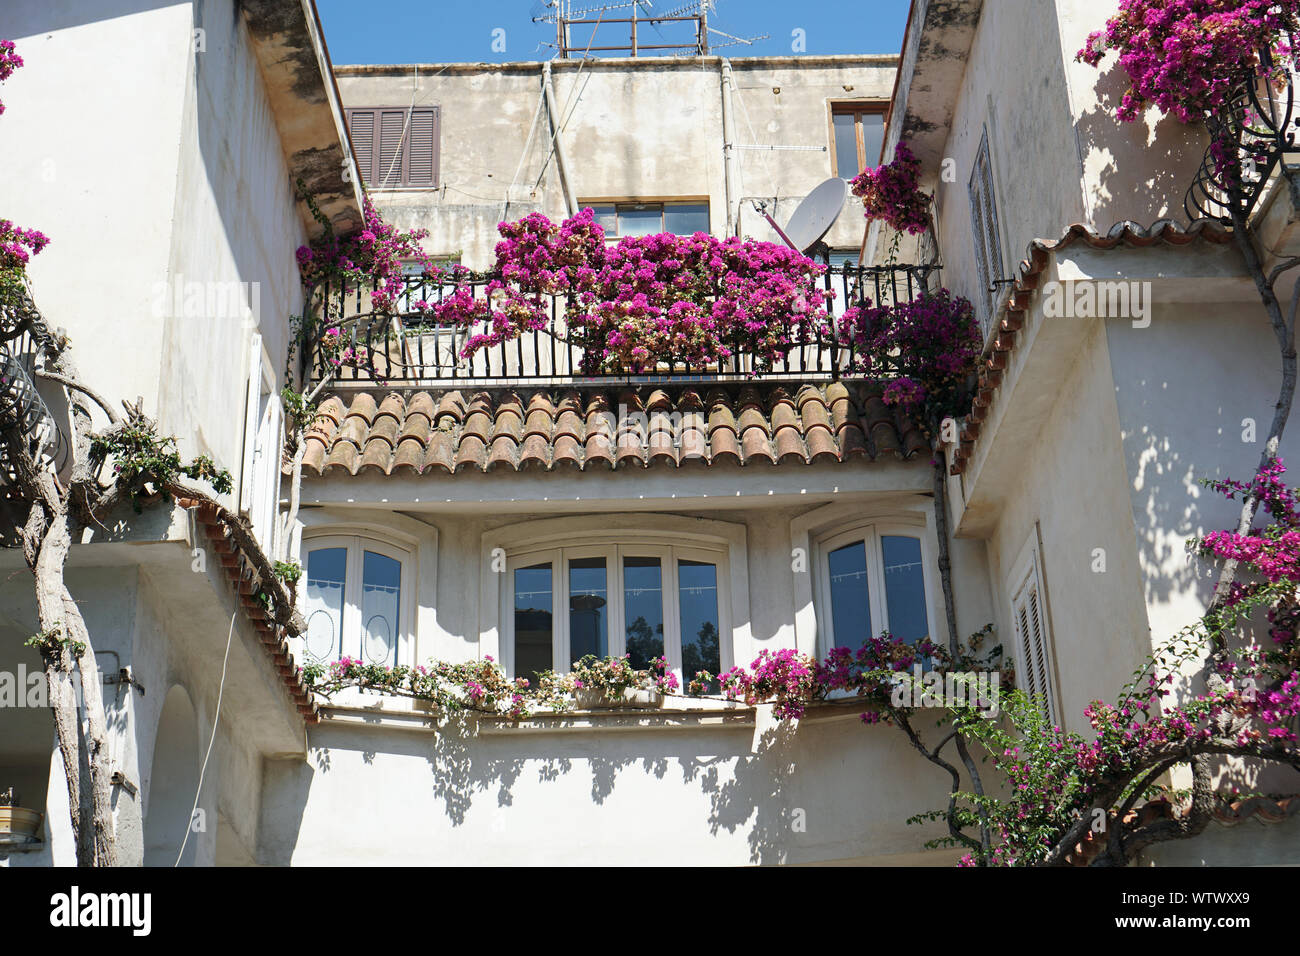 Typical Italian flowered balconies of an old house in Tropea, Calabria, Italy in August 2019 Stock Photo